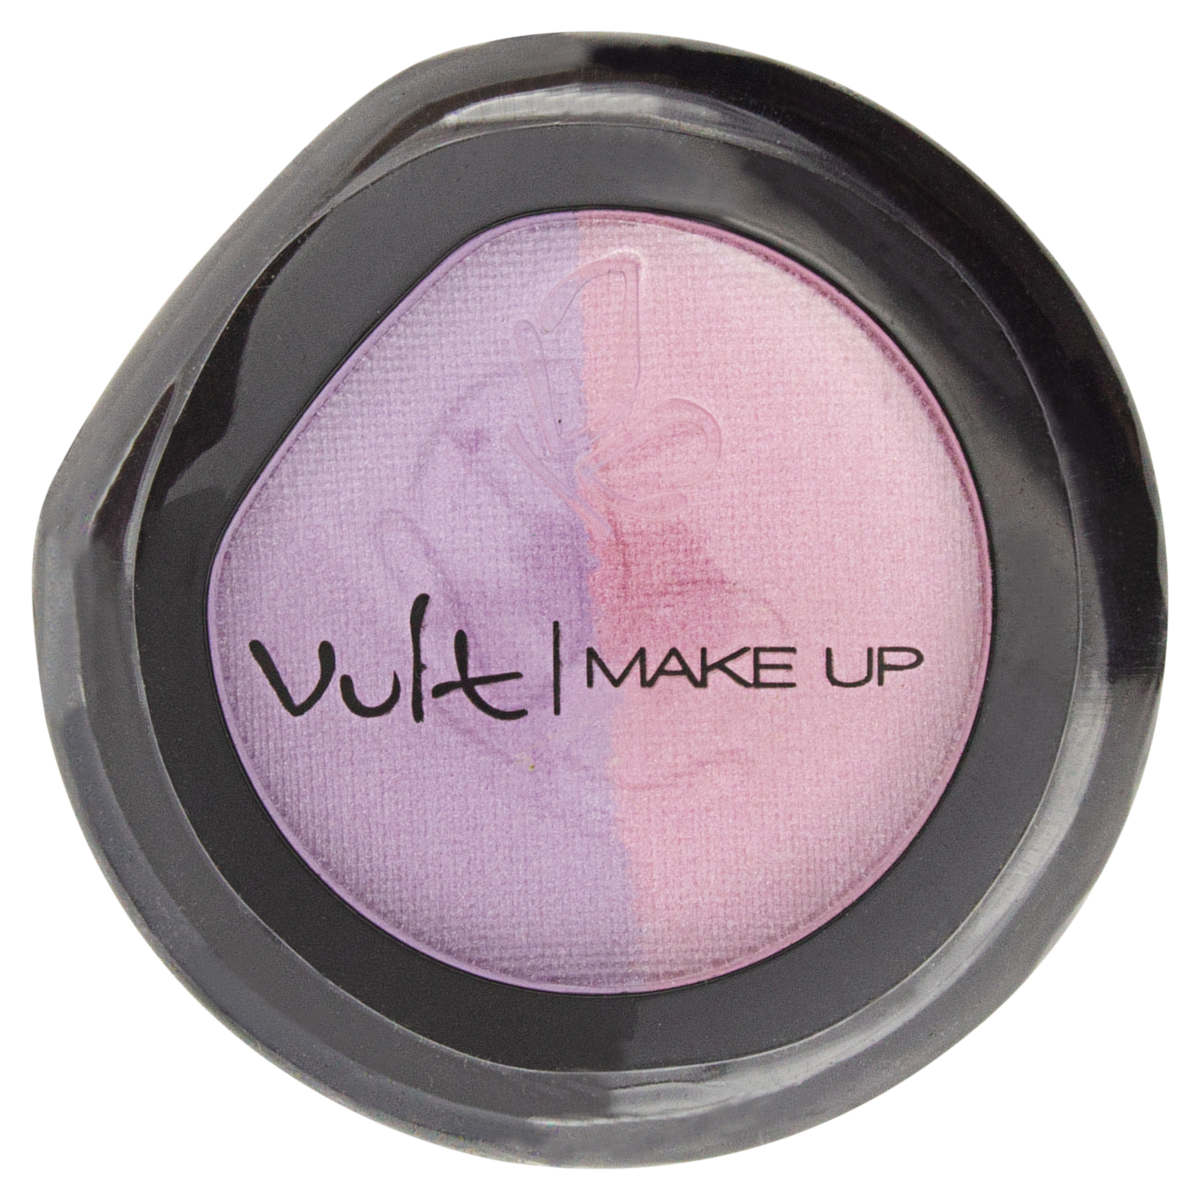 7898417962089 - SOMBRA DUO 08 VULT MAKE UP 2,5G